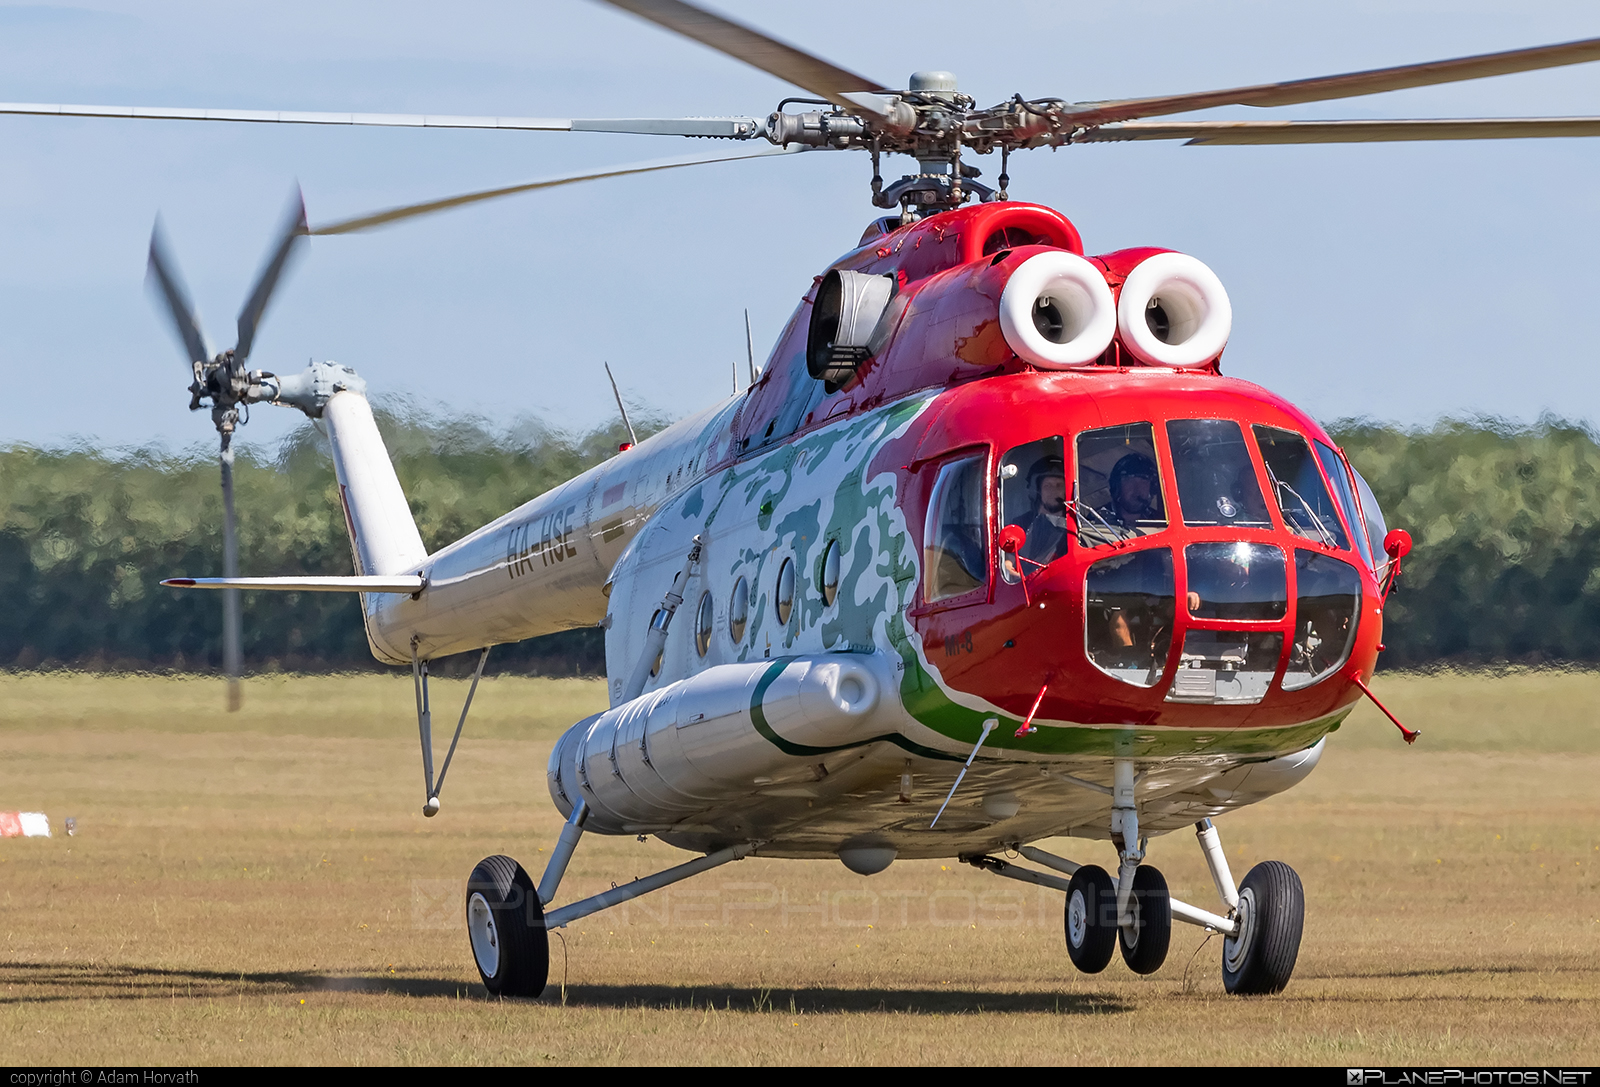 Mil Mi-8T - HA-HSE operated by Artic Group Kft. #articgroupkft #mi8 #mi8t #mil #milhelicopters #milmi8 #milmi8t